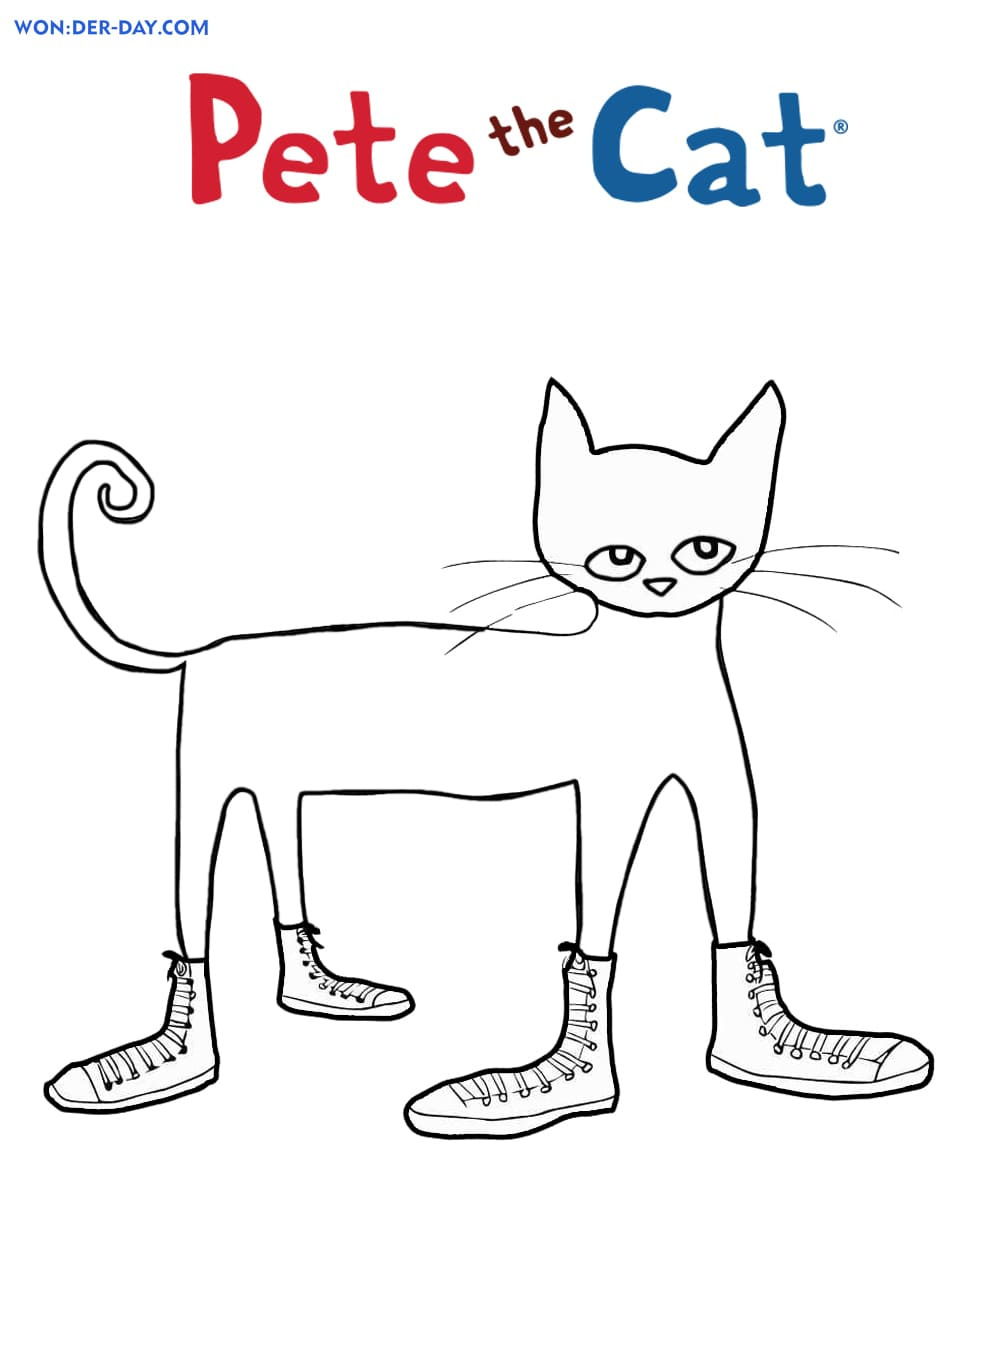 Pete The Cat Coloring Pages Free Coloring Pages WONDER DAY 